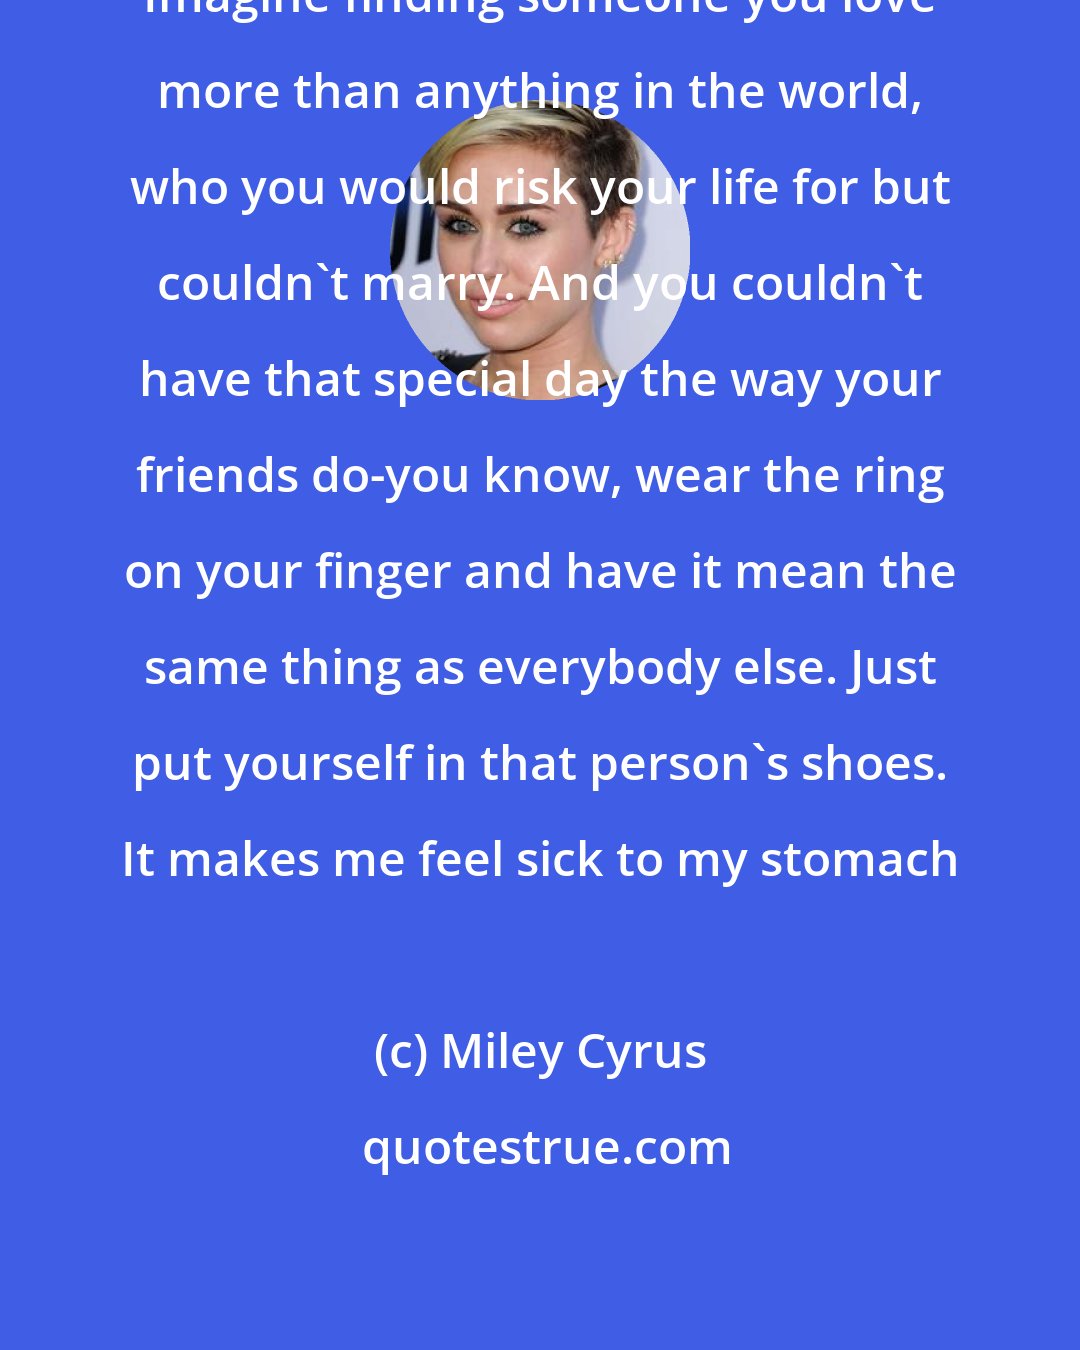 Miley Cyrus: Imagine finding someone you love more than anything in the world, who you would risk your life for but couldn't marry. And you couldn't have that special day the way your friends do-you know, wear the ring on your finger and have it mean the same thing as everybody else. Just put yourself in that person's shoes. It makes me feel sick to my stomach